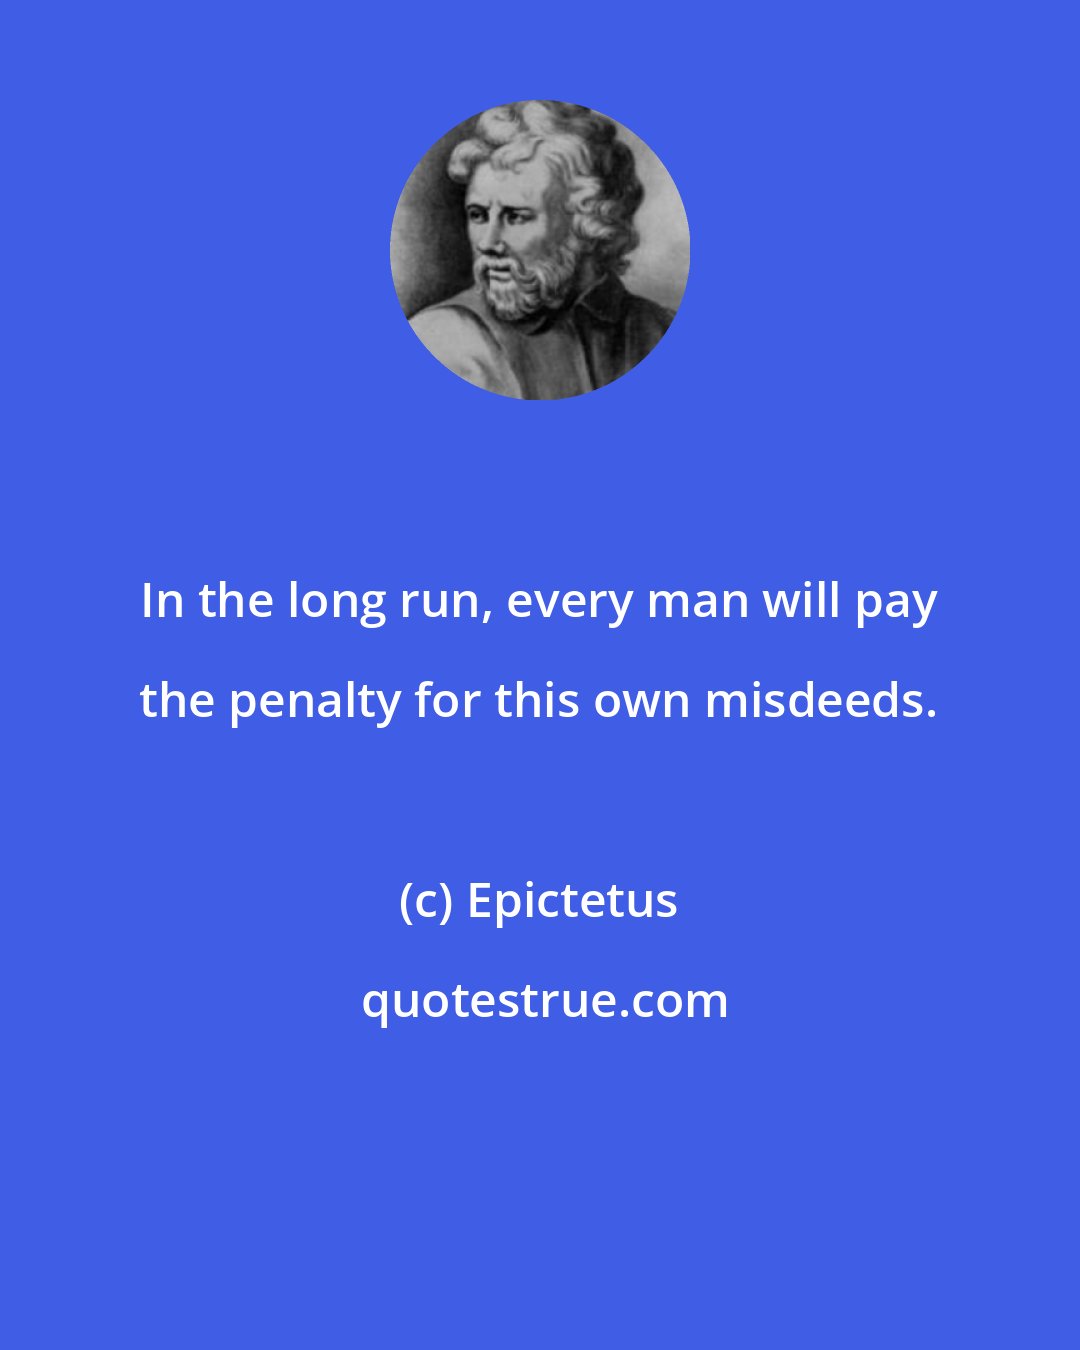 Epictetus: In the long run, every man will pay the penalty for this own misdeeds.